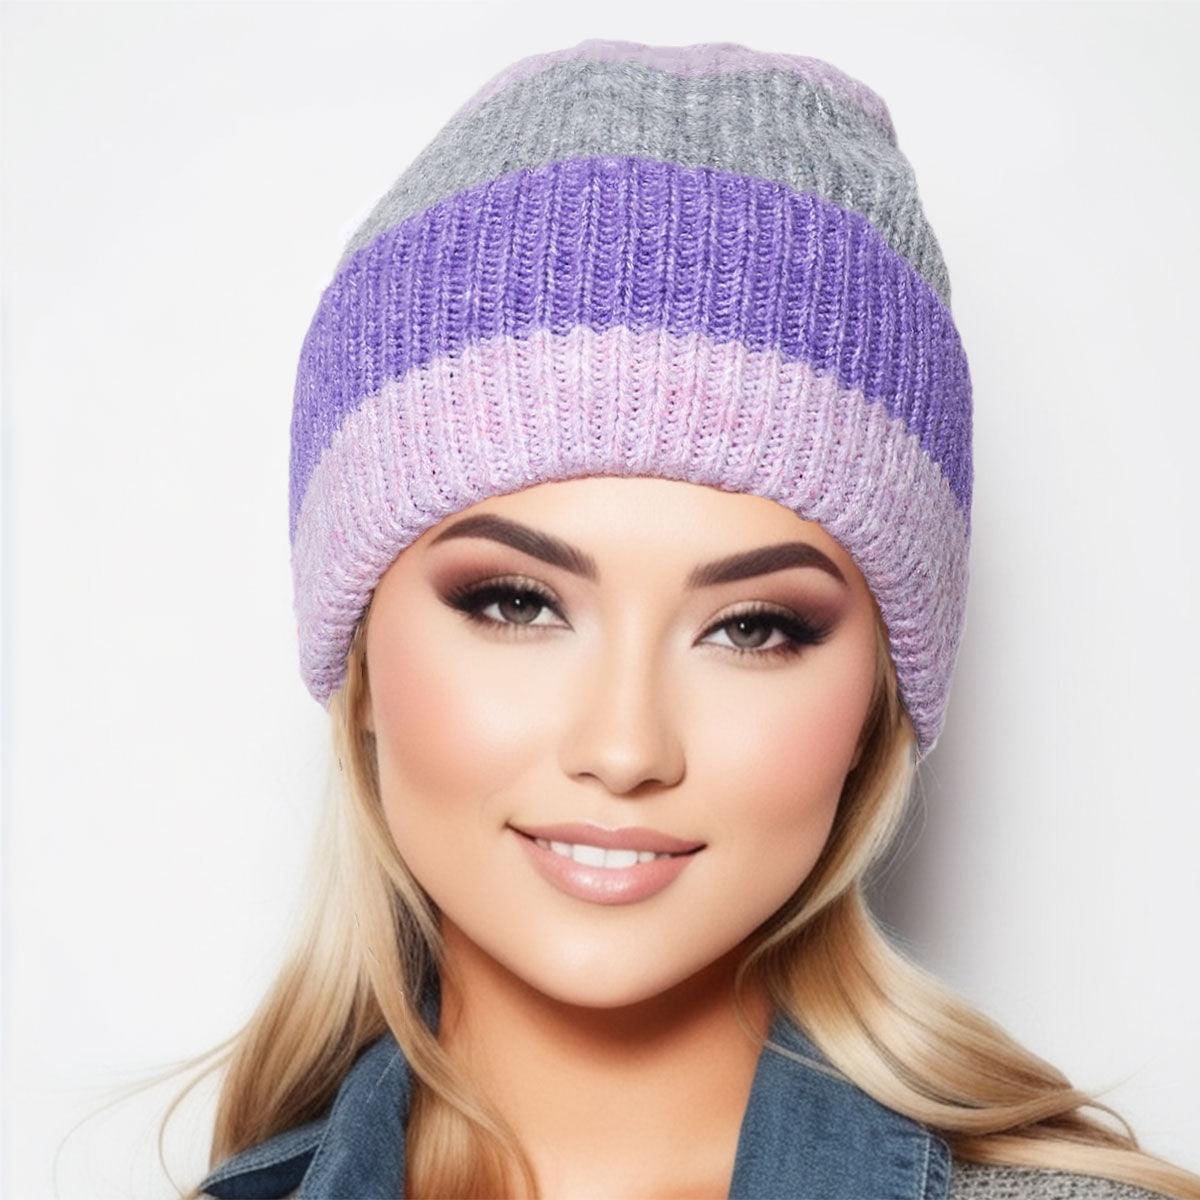 Stay Toasty: Ribbed Knit Striped Beanie Hat in Purple